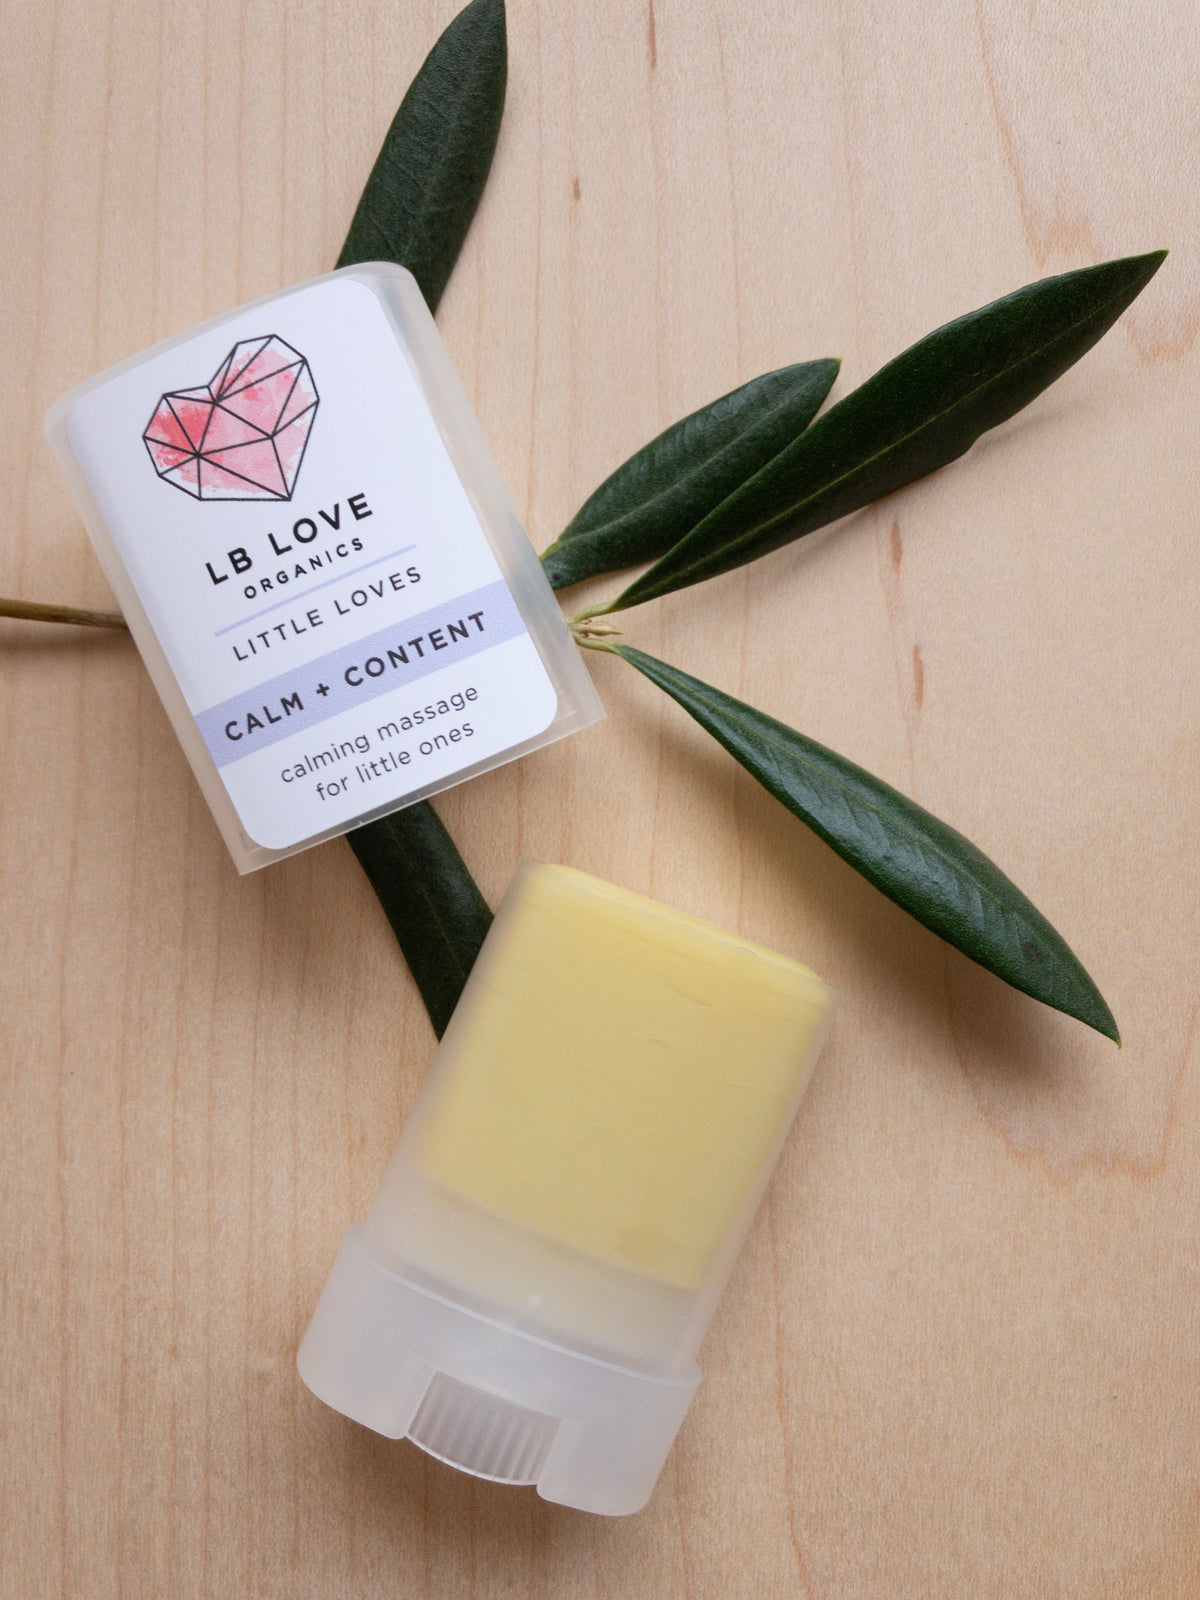 LB Love Organics calm and content baby massage soothing stick mama's little helpers